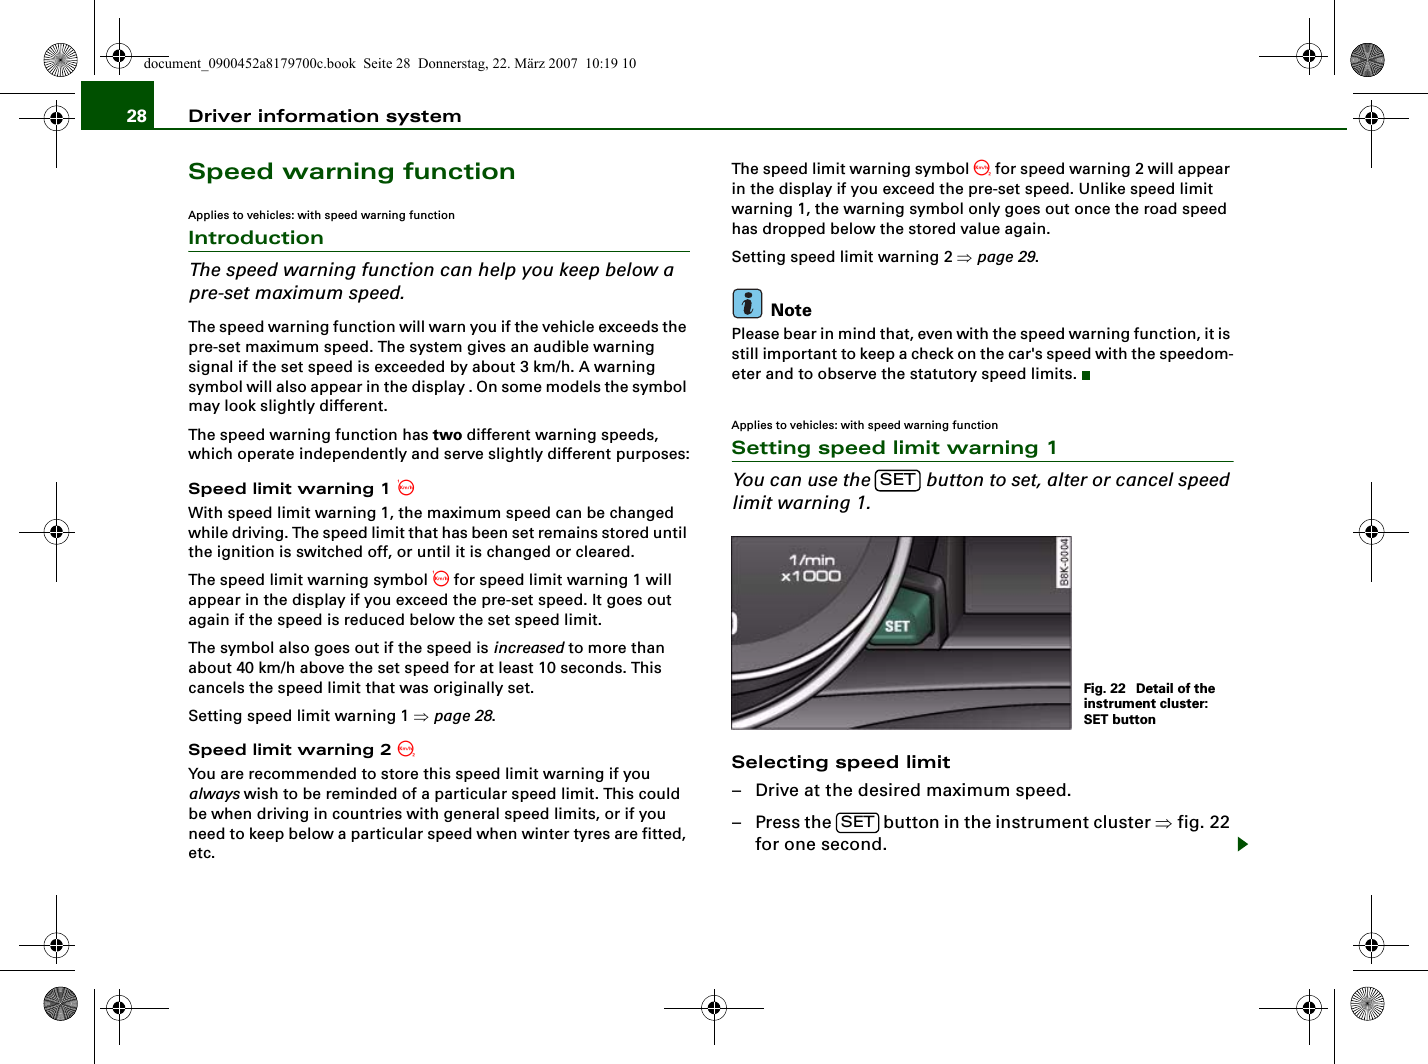 Driver information system28Speed warning functionApplies to vehicles: with speed warning functionIntroductionThe speed warning function can help you keep below a pre-set maximum speed.The speed warning function will warn you if the vehicle exceeds the pre-set maximum speed. The system gives an audible warning signal if the set speed is exceeded by about 3 km/h. A warning symbol will also appear in the display . On some models the symbol may look slightly different.The speed warning function has two different warning speeds, which operate independently and serve slightly different purposes:Speed limit warning 1 With speed limit warning 1, the maximum speed can be changed while driving. The speed limit that has been set remains stored until the ignition is switched off, or until it is changed or cleared.The speed limit warning symbol  for speed limit warning 1 will appear in the display if you exceed the pre-set speed. It goes out again if the speed is reduced below the set speed limit.The symbol also goes out if the speed is increased to more than about 40 km/h above the set speed for at least 10 seconds. This cancels the speed limit that was originally set.Setting speed limit warning 1 ⇒page 28.Speed limit warning 2 You are recommended to store this speed limit warning if you always wish to be reminded of a particular speed limit. This could be when driving in countries with general speed limits, or if you need to keep below a particular speed when winter tyres are fitted, etc.The speed limit warning symbol  for speed warning 2 will appear in the display if you exceed the pre-set speed. Unlike speed limit warning 1, the warning symbol only goes out once the road speed has dropped below the stored value again.Setting speed limit warning 2 ⇒page 29.NotePlease bear in mind that, even with the speed warning function, it is still important to keep a check on the car&apos;s speed with the speedom-eter and to observe the statutory speed limits.Applies to vehicles: with speed warning functionSetting speed limit warning 1You can use the   button to set, alter or cancel speed limit warning 1.Selecting speed limit– Drive at the desired maximum speed.– Press the   button in the instrument cluster ⇒fig. 22 for one second.SETFig. 22  Detail of the instrument cluster: SET buttonSETdocument_0900452a8179700c.book  Seite 28  Donnerstag, 22. März 2007  10:19 10